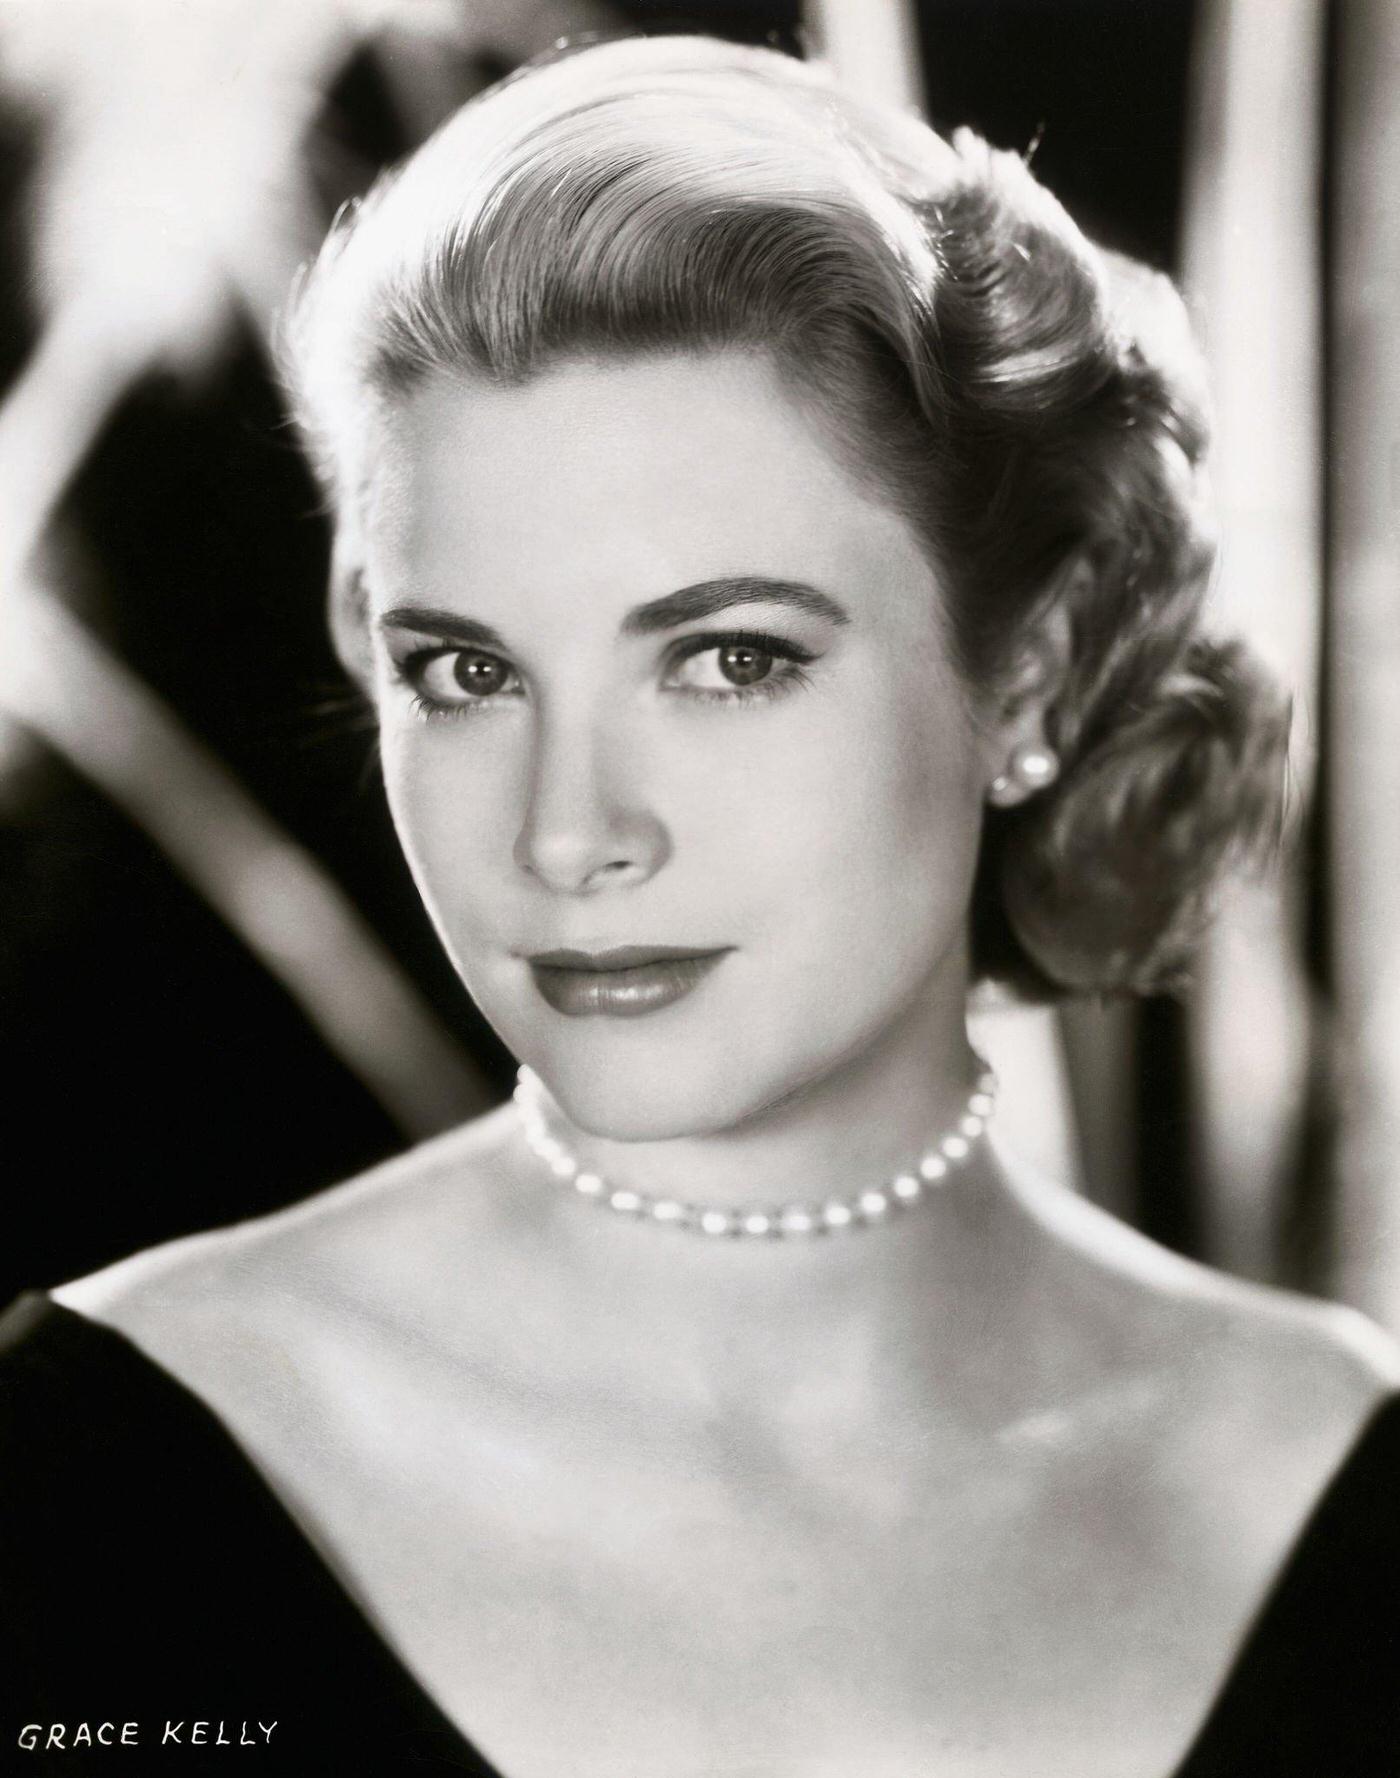 Grace Kelly publicity in connection with the film Rear Window (1954).